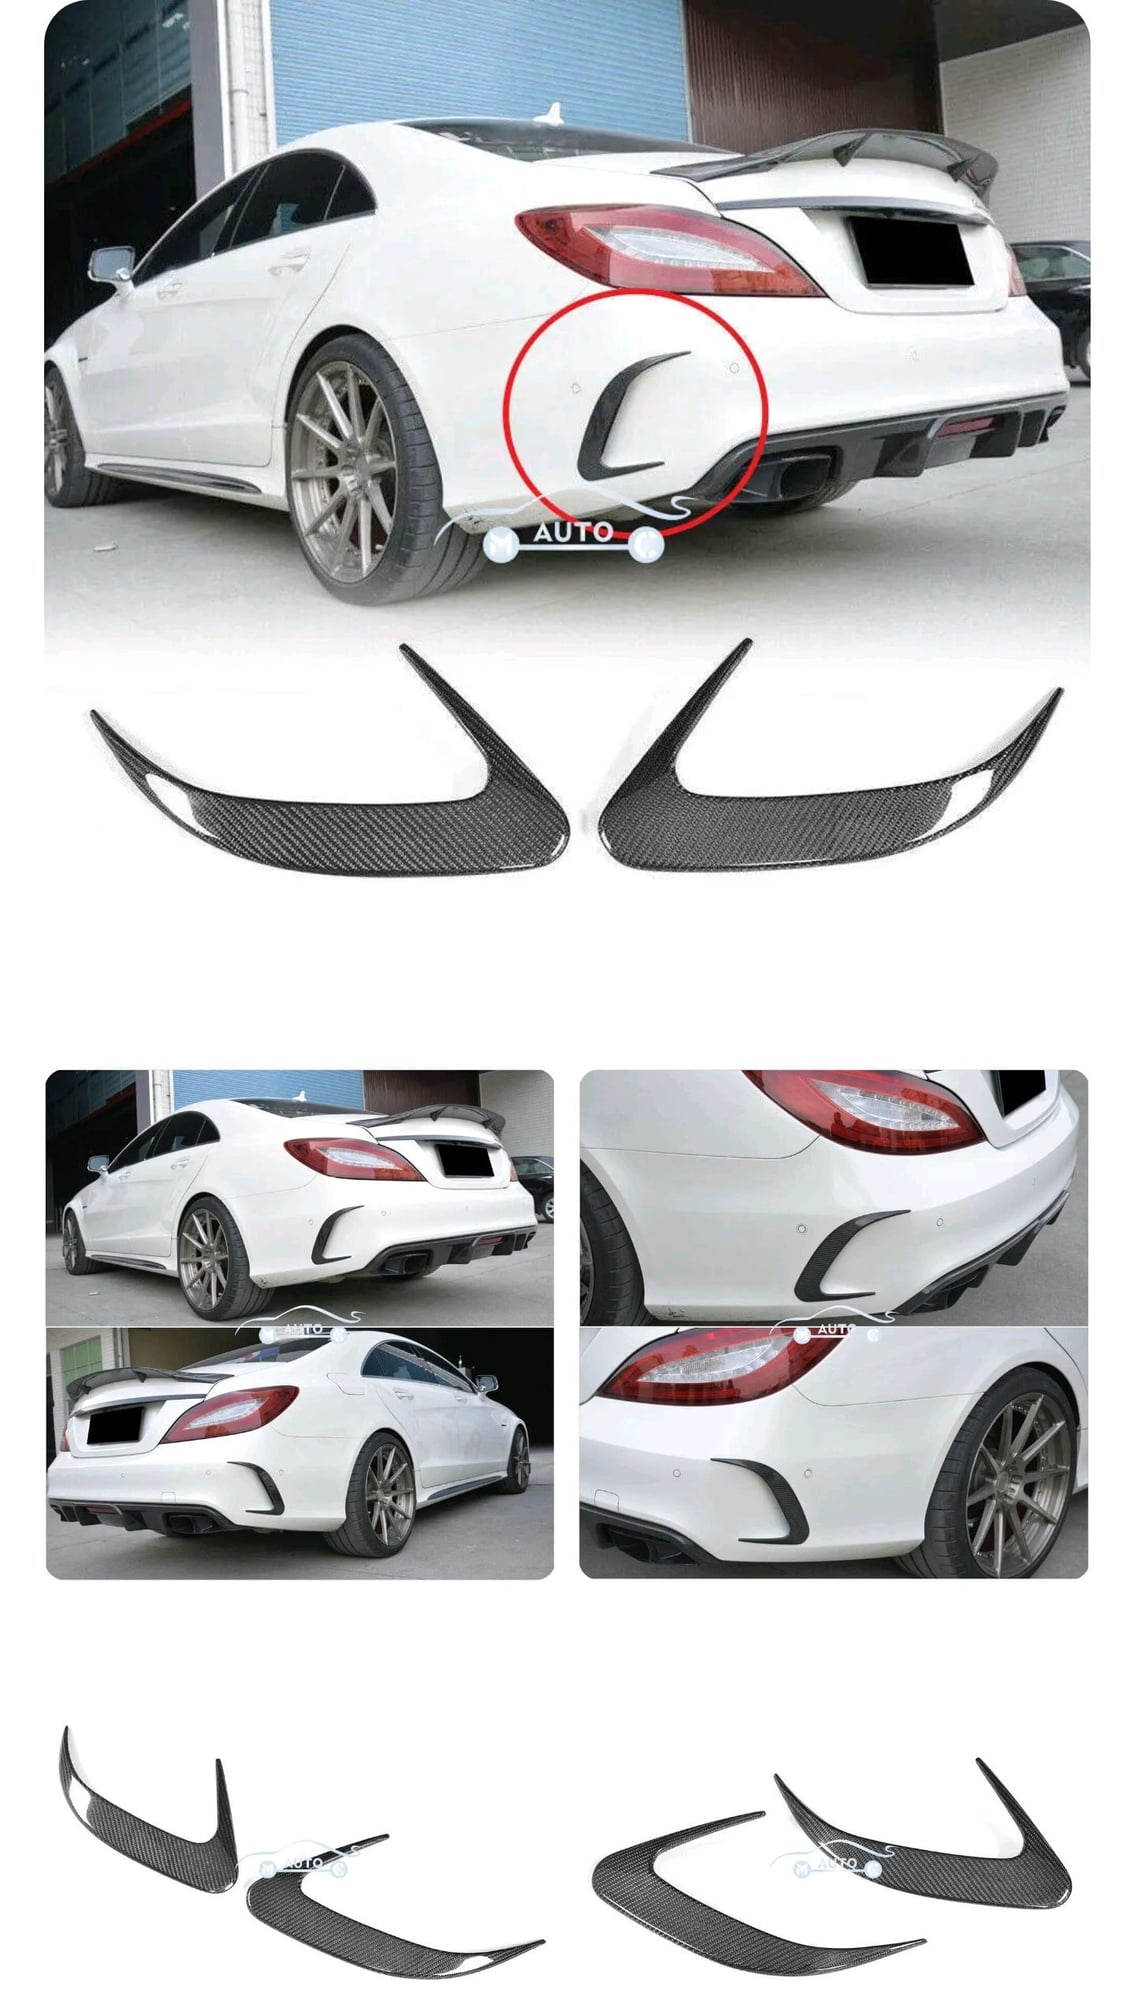 Exterior Body Parts - Cls carbon fiber bumper pieces - New - 2015 to 2017 Mercedes-Benz CLS-Class - Clearwater, FL 33759, United States